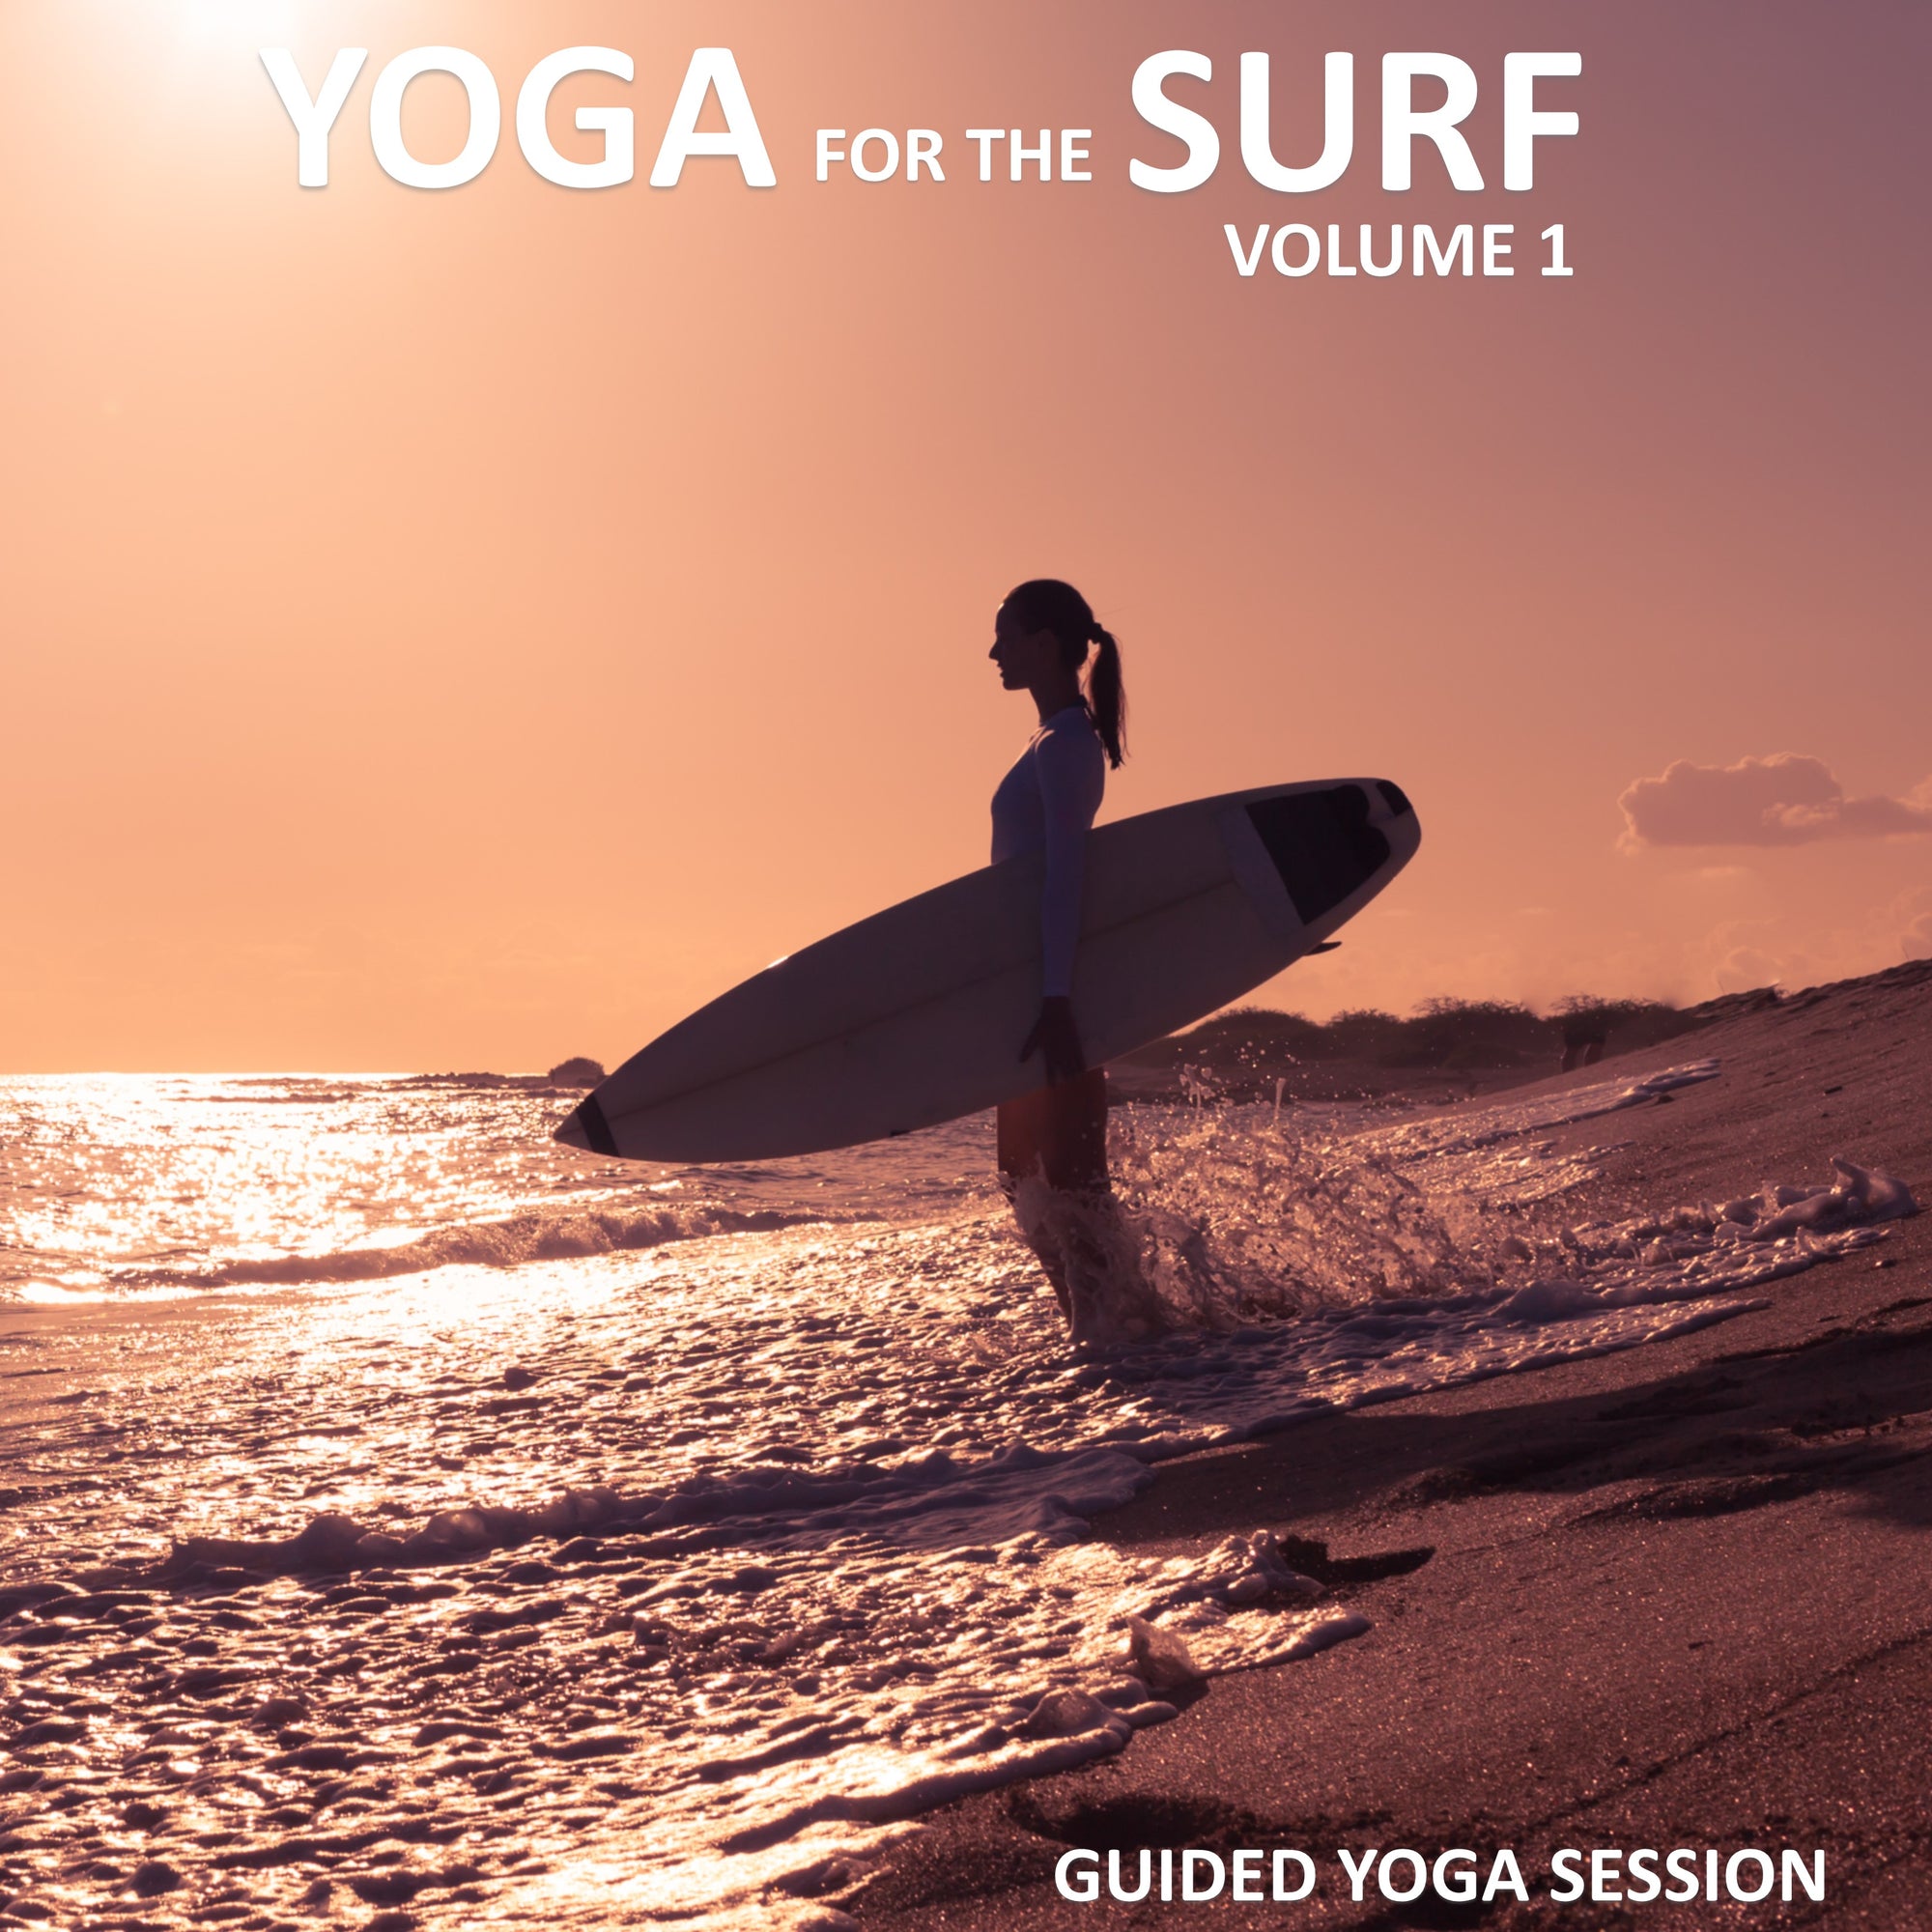 Yoga for the Surf Volume 1